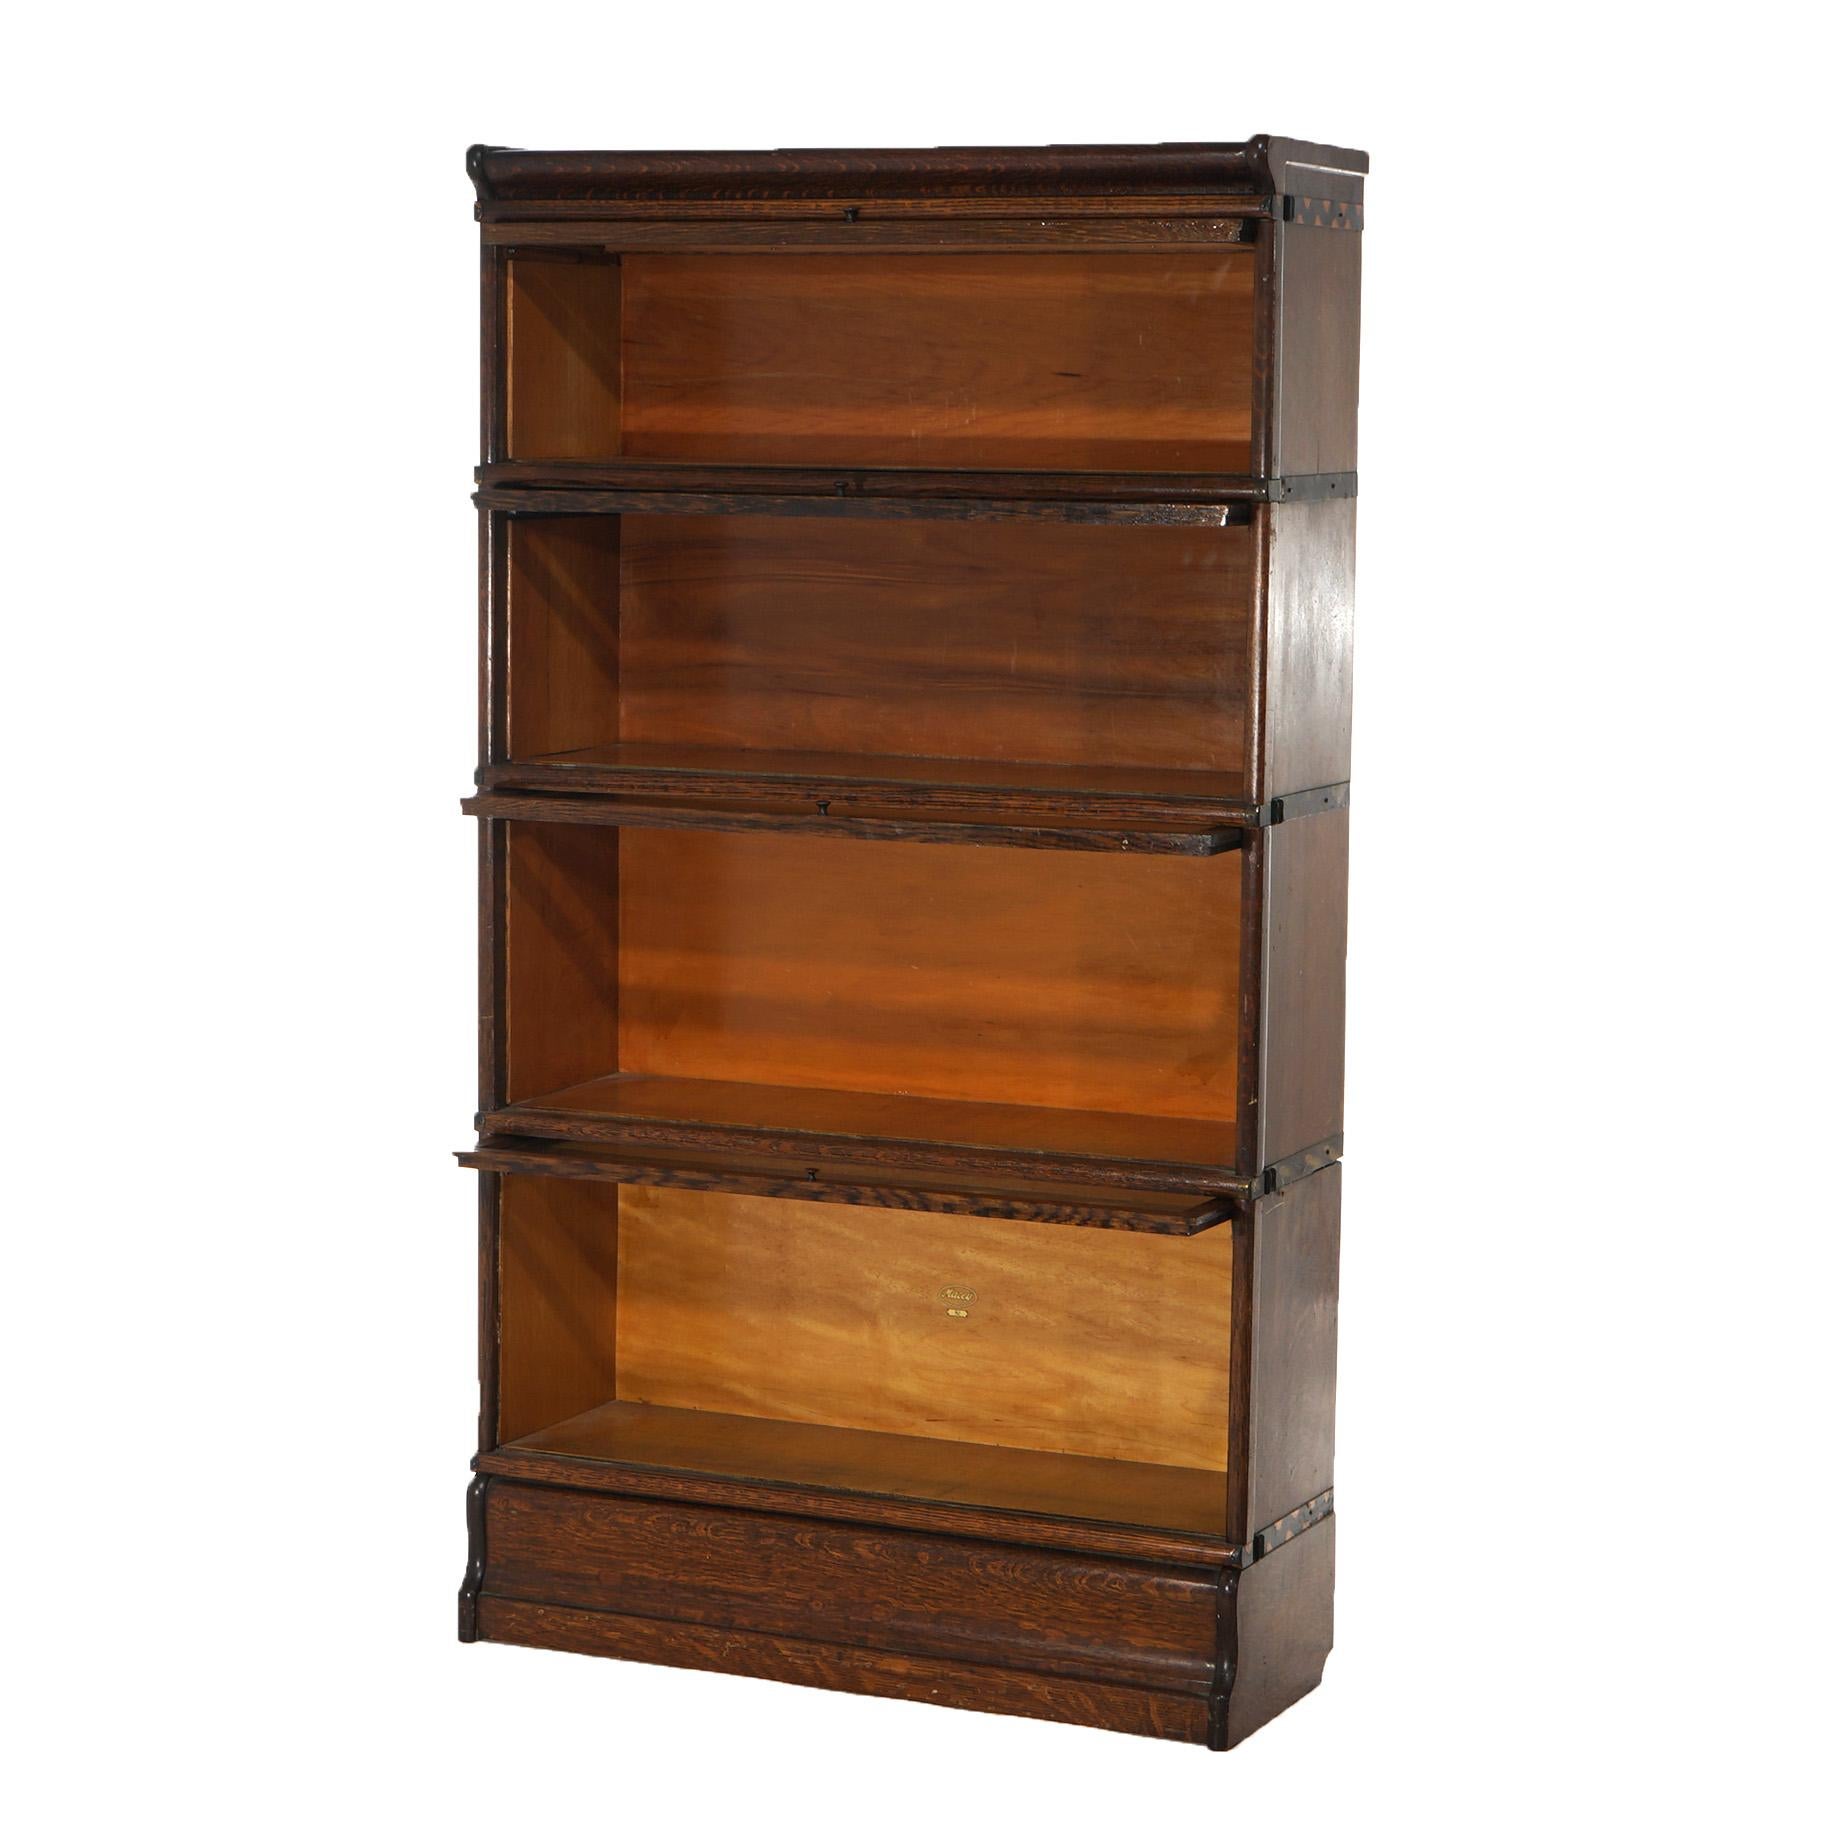 barrister bookcases with glass doors